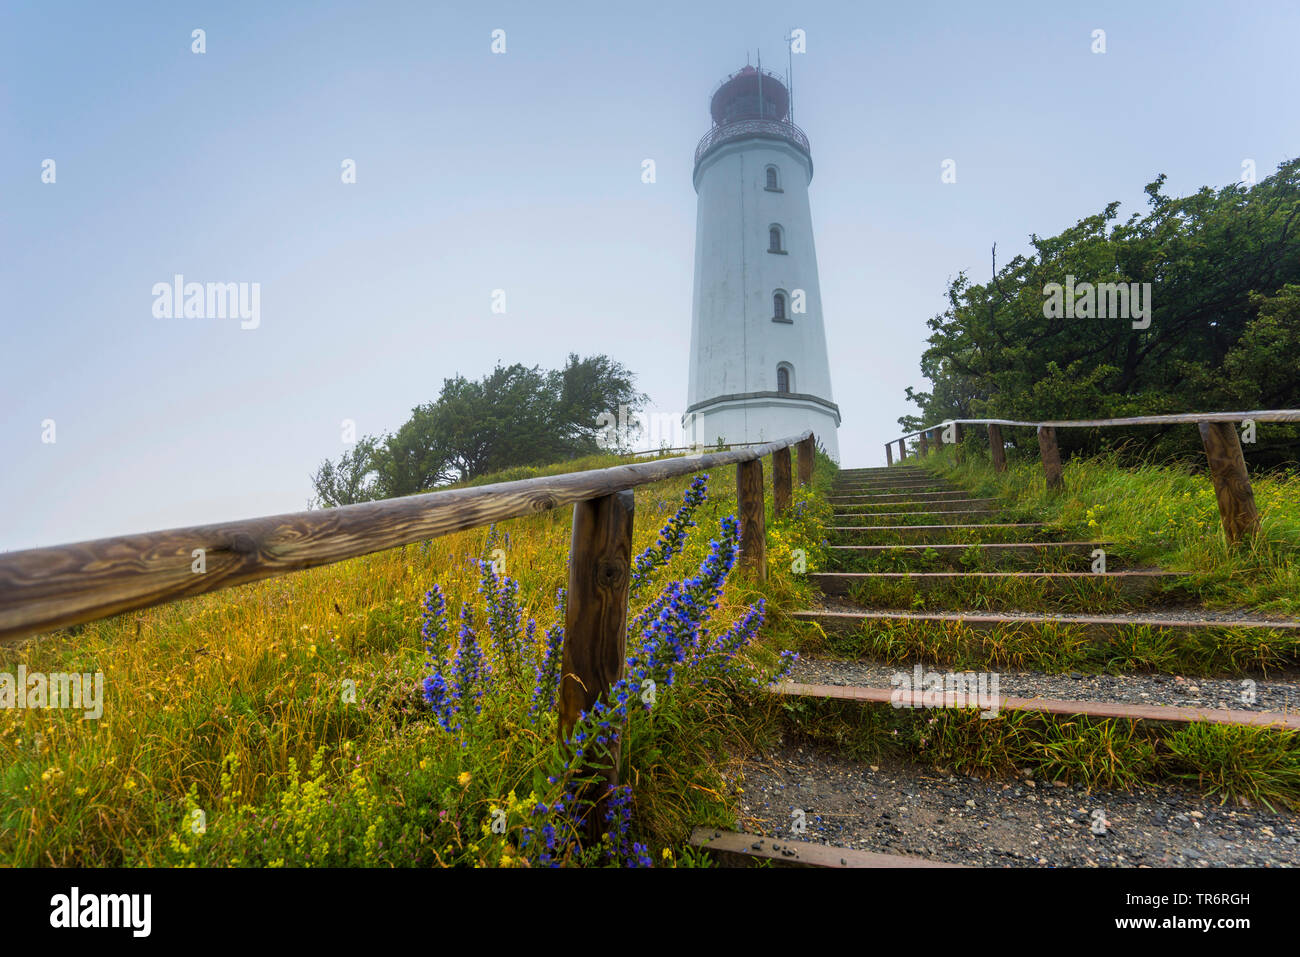 blueweed, blue devil, viper's bugloss, common viper's-bugloss (Echium vulgare), lighthouse of Hiddensee in mist, Germany, Mecklenburg-Western Pomerania, Hiddensee Stock Photo